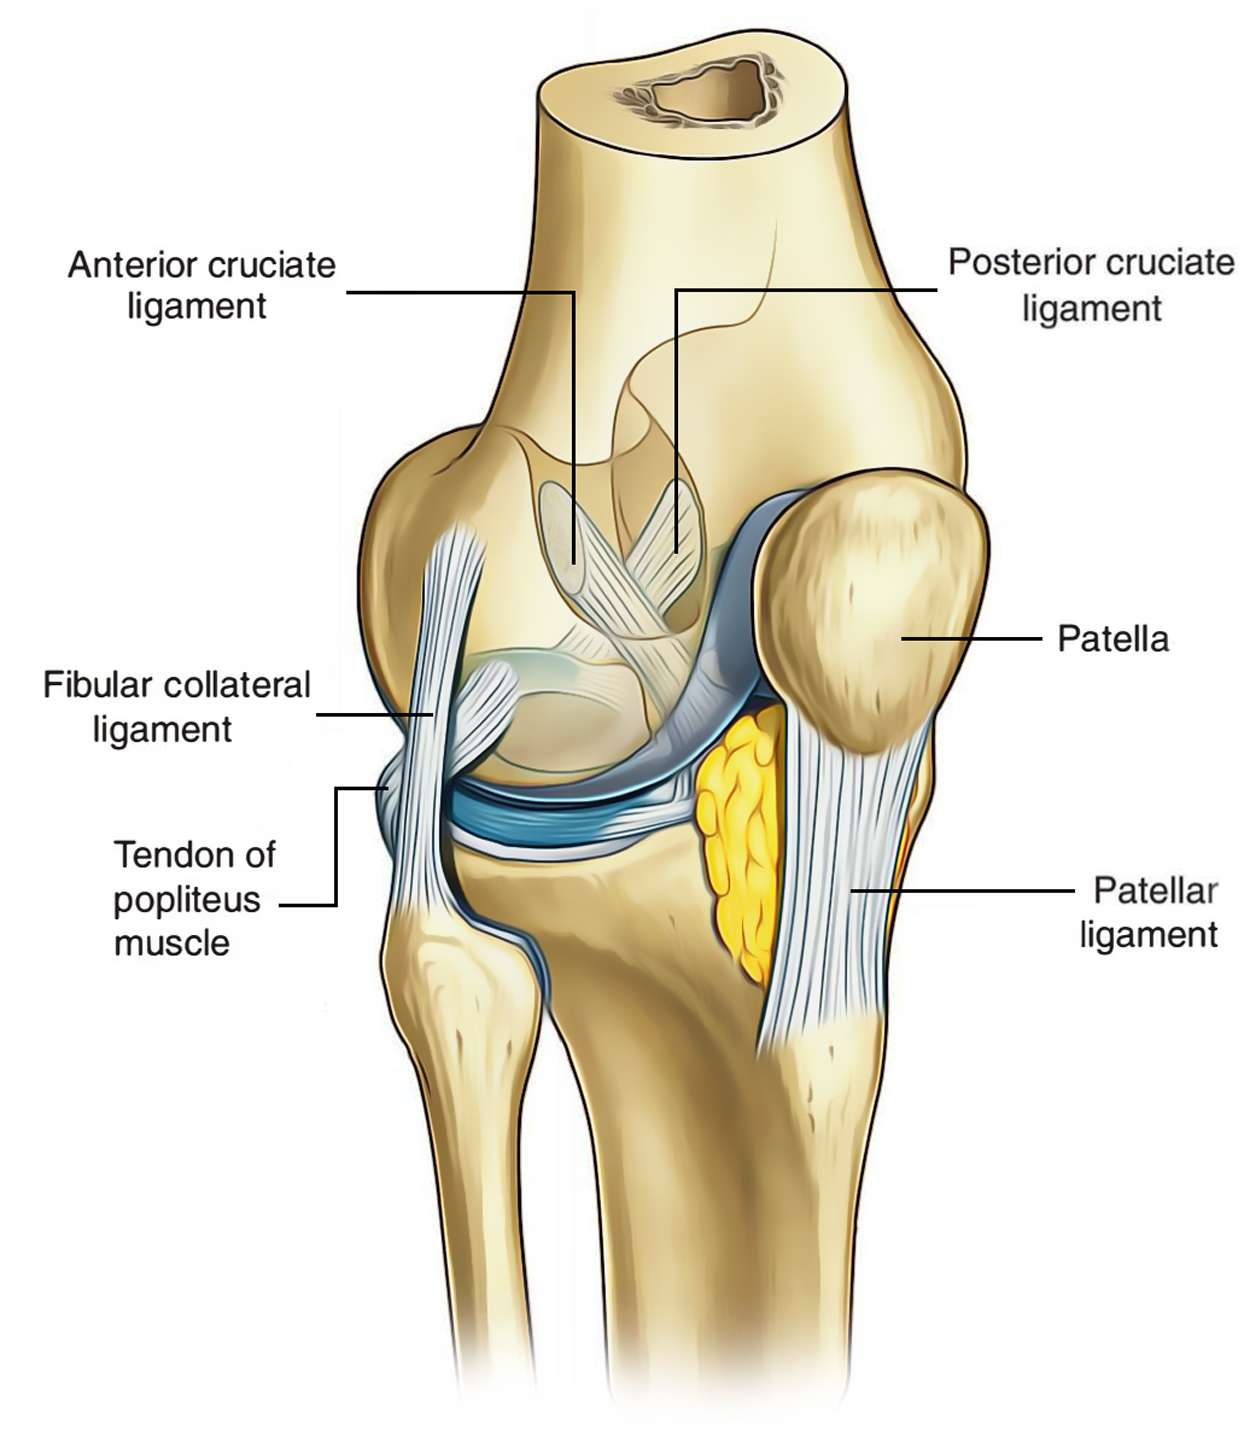 Easy Notes On ã?Ligaments of the Knee JointãLearn in Just 3 Minutes ...